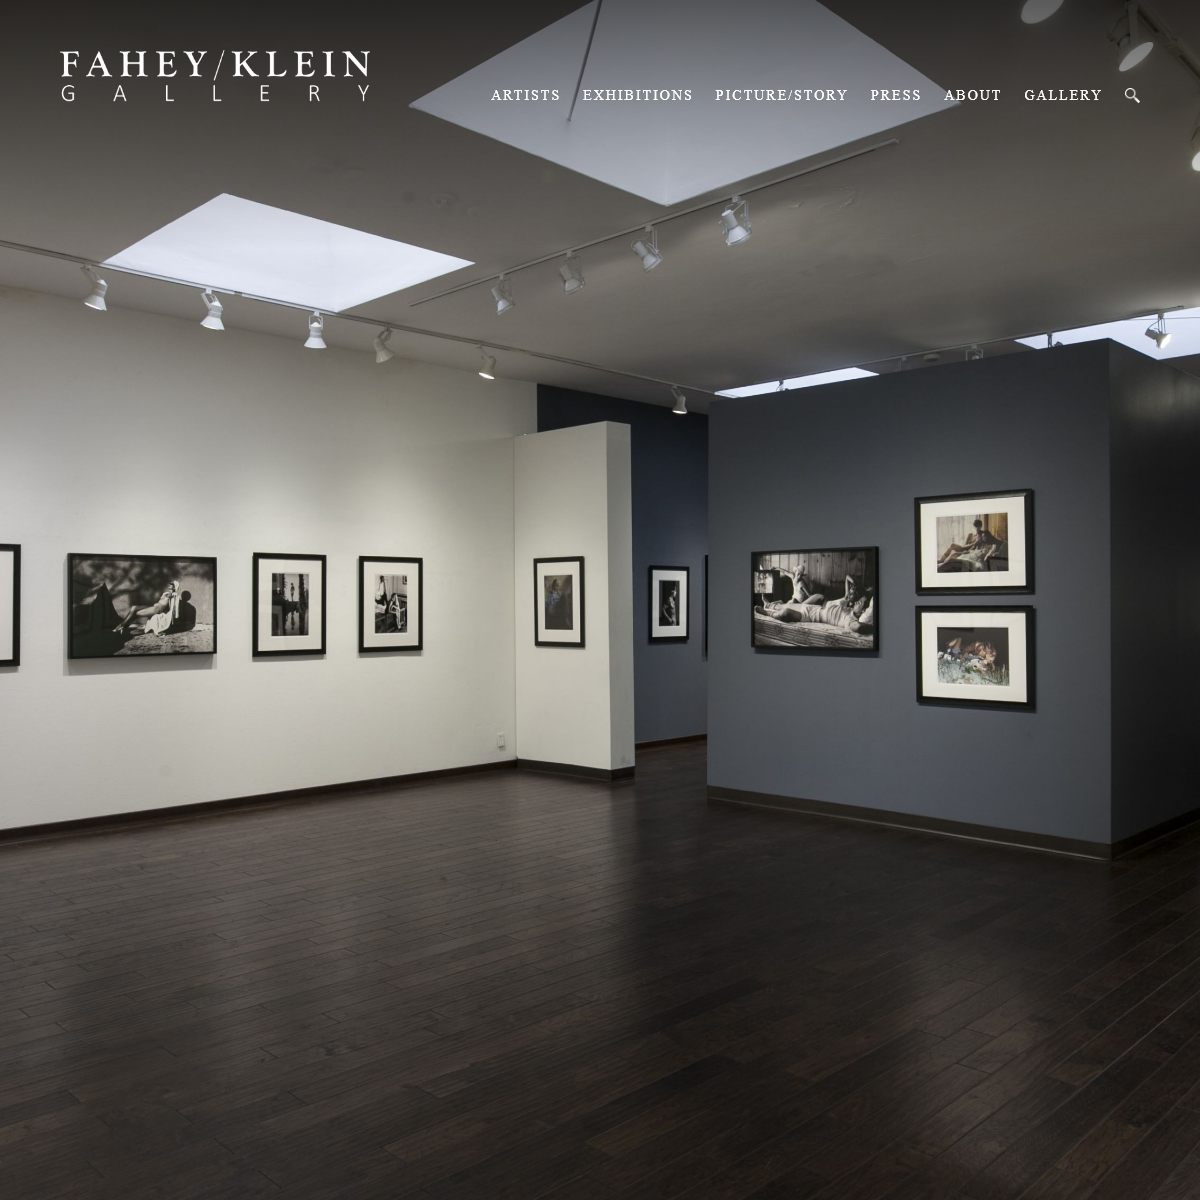 A complete backup of faheykleingallery.com